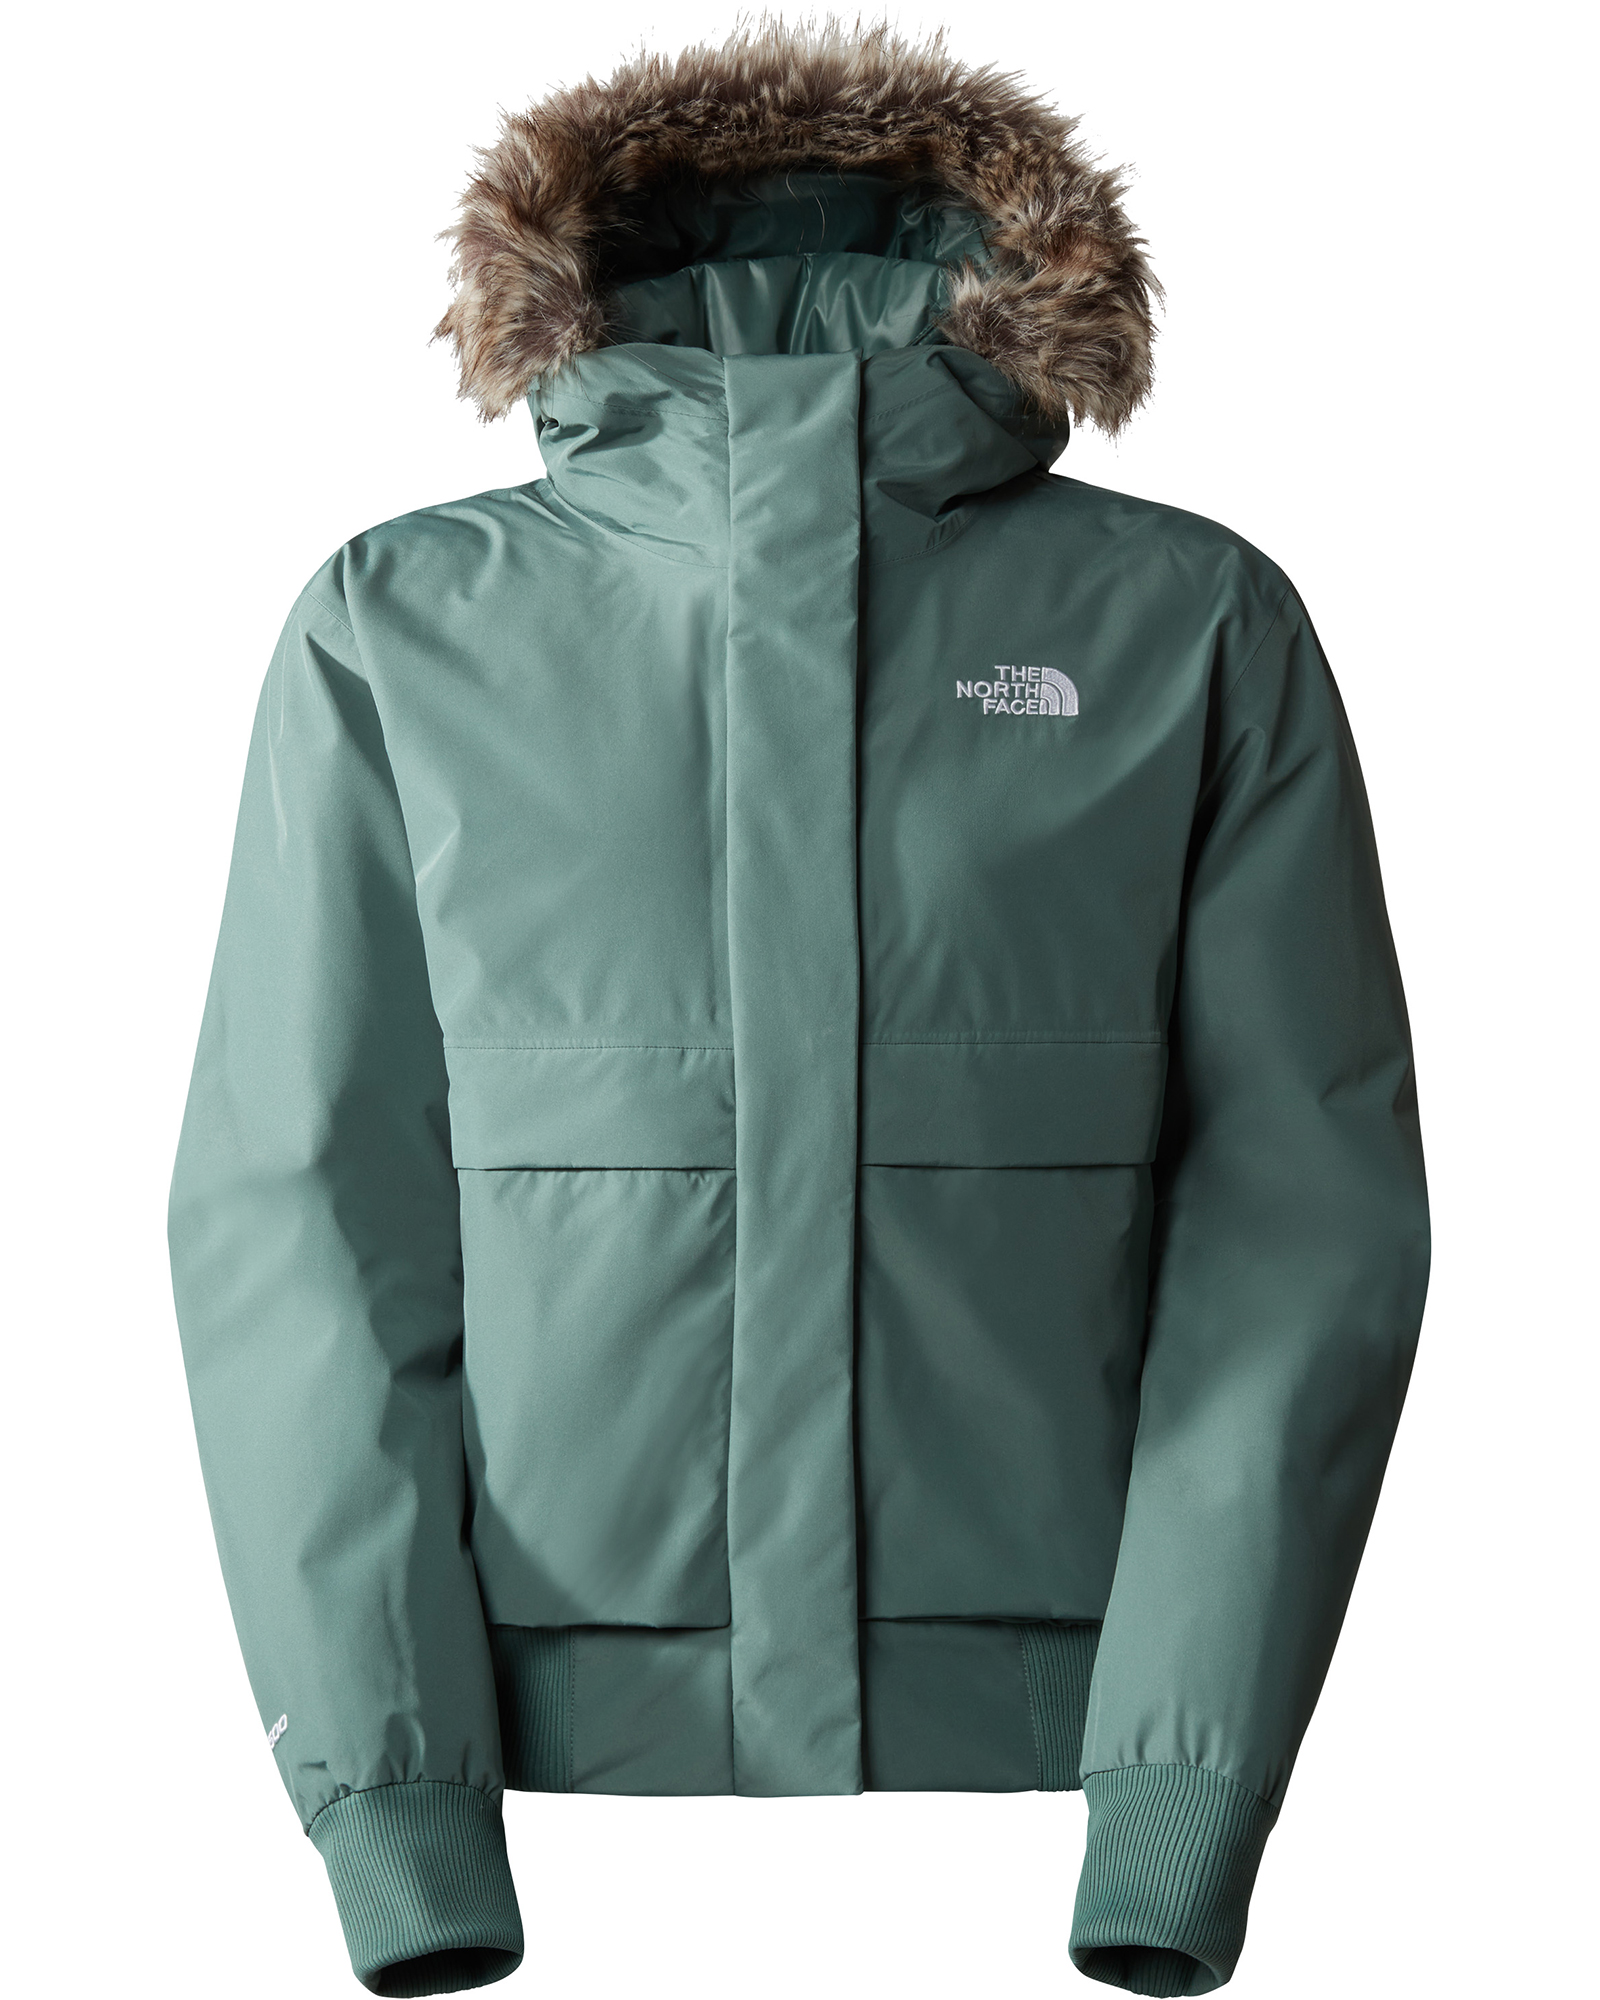 The North Face Women’s Arctic Bomber Down Jacket - Dark Sage L